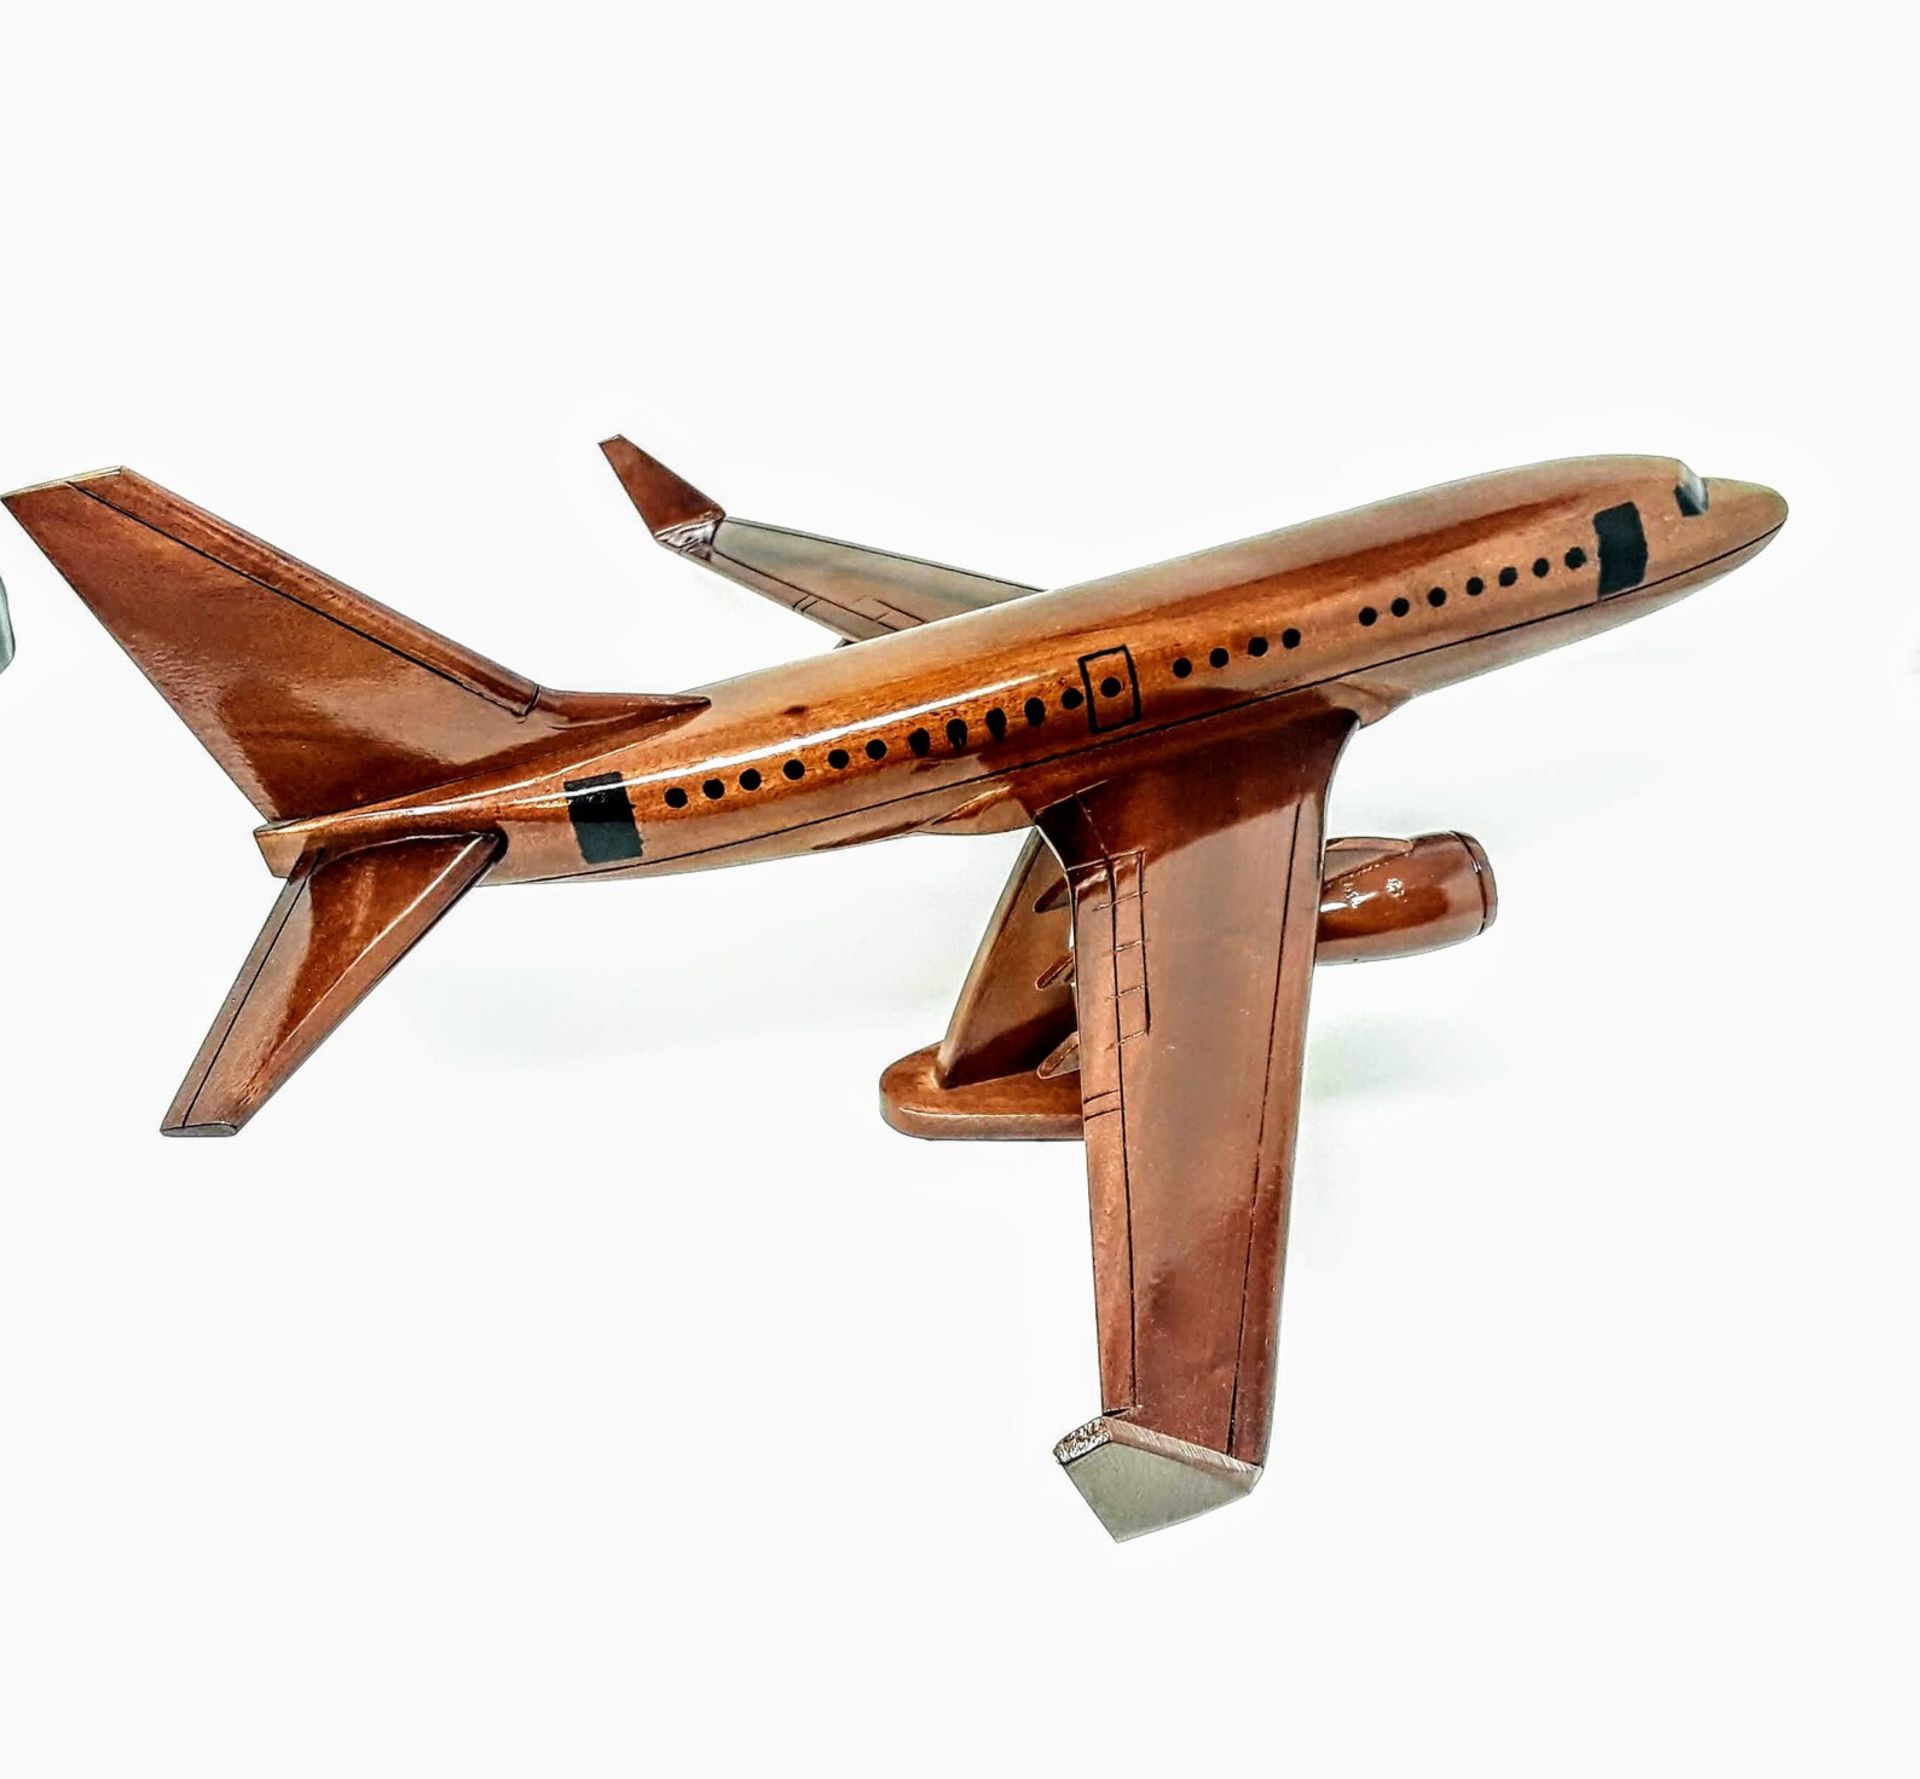 Boeing 737 Wooden Scale Desk Display - Image 2 of 4